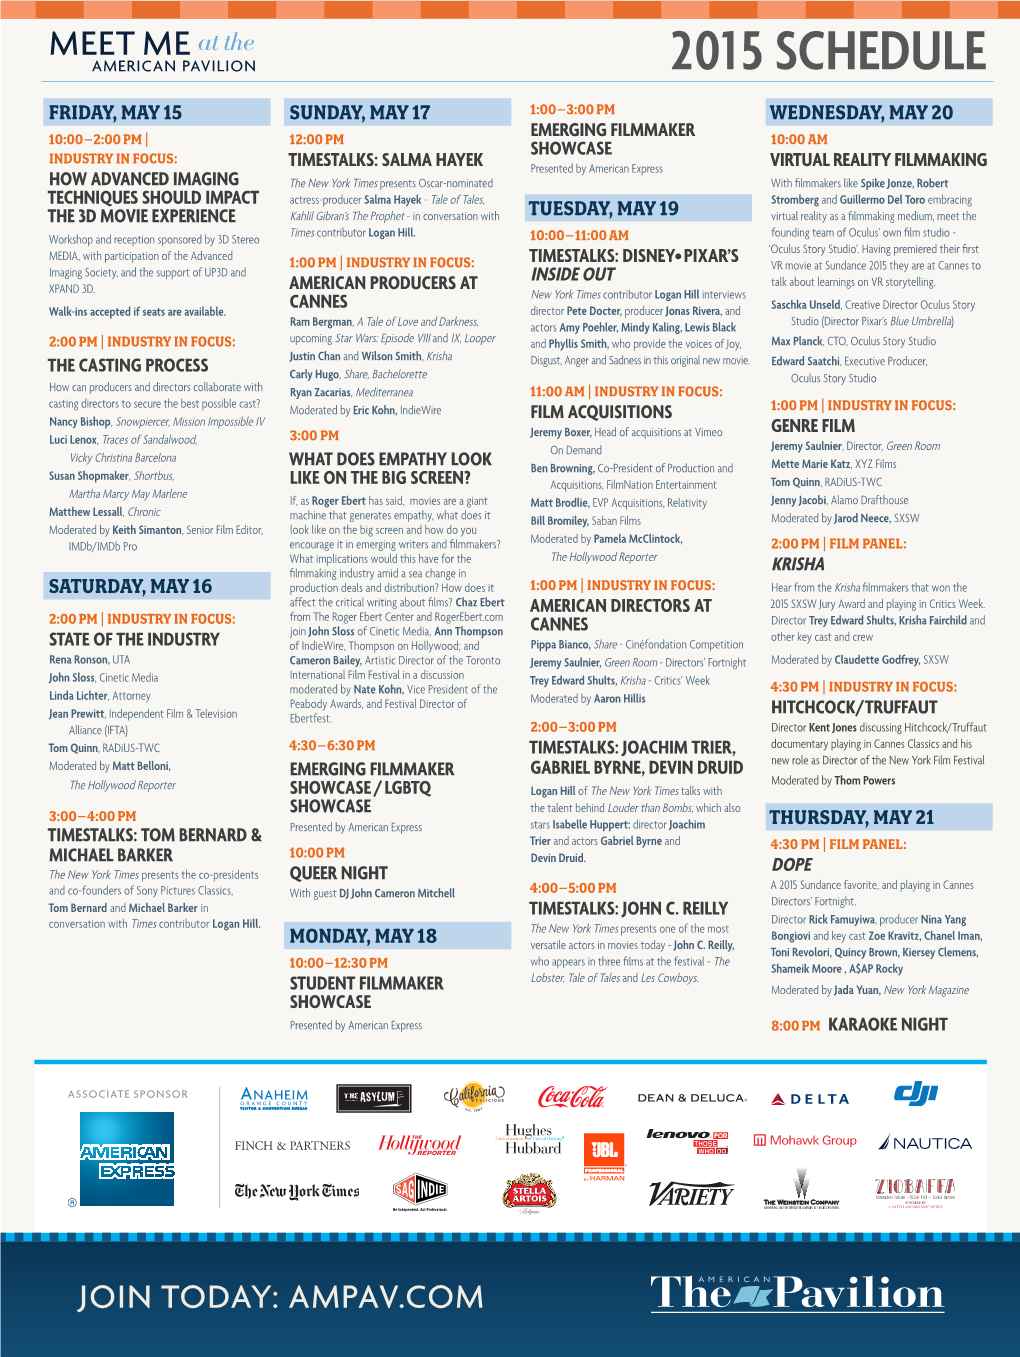 The American Pavilion Cannes 2015 Schedule